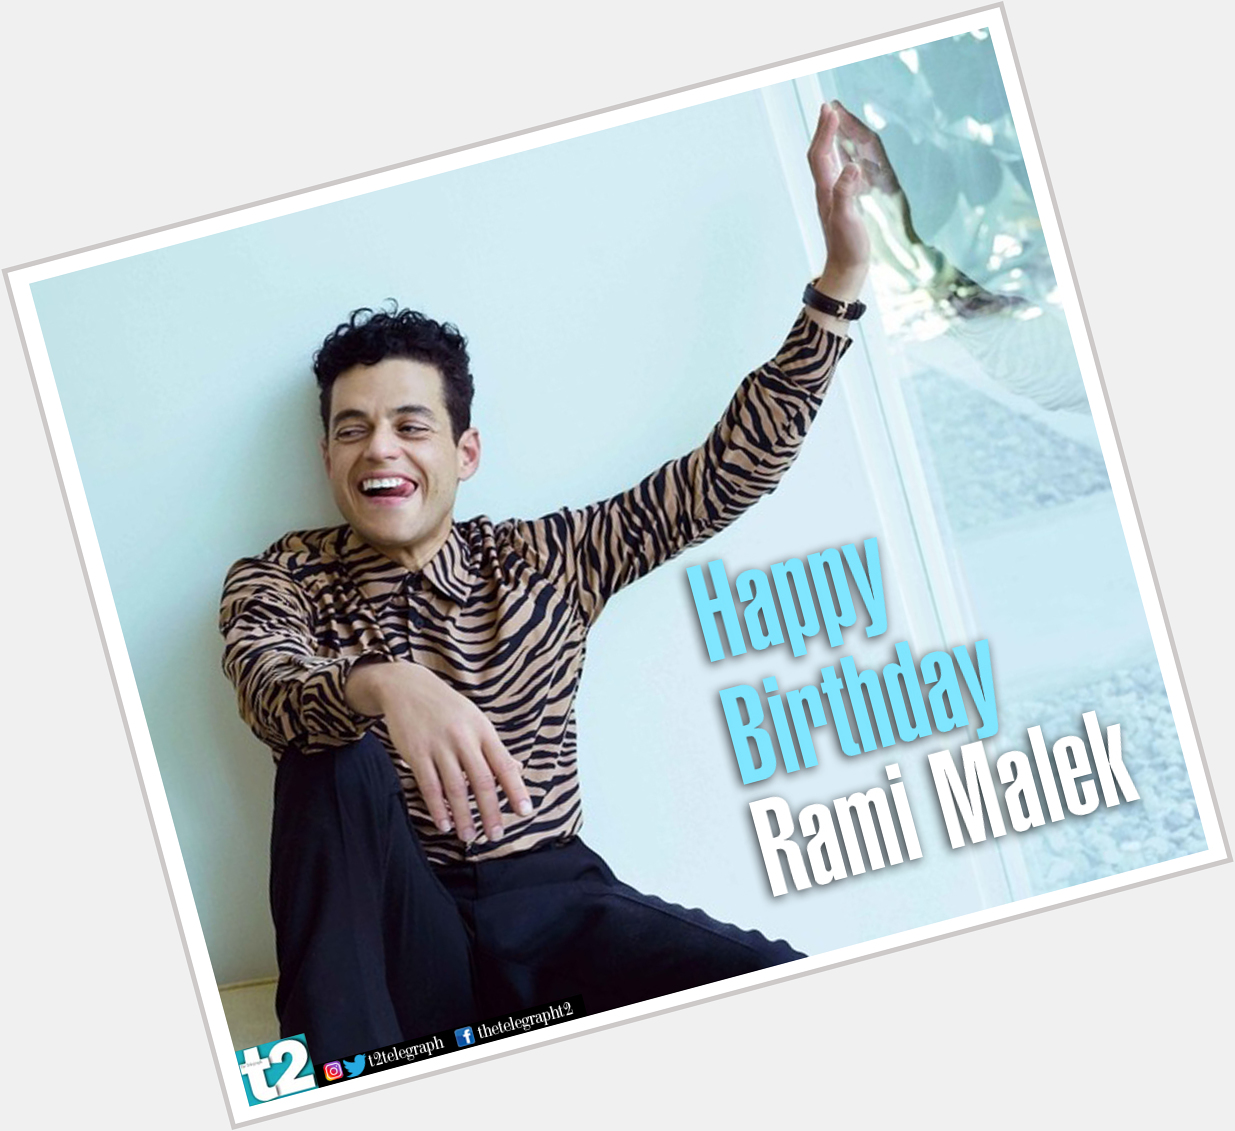 \Mercury\ rising! t2 wishes Rami Malek a very happy birthday. We can\t wait to watch him as the villain in Bond 25! 